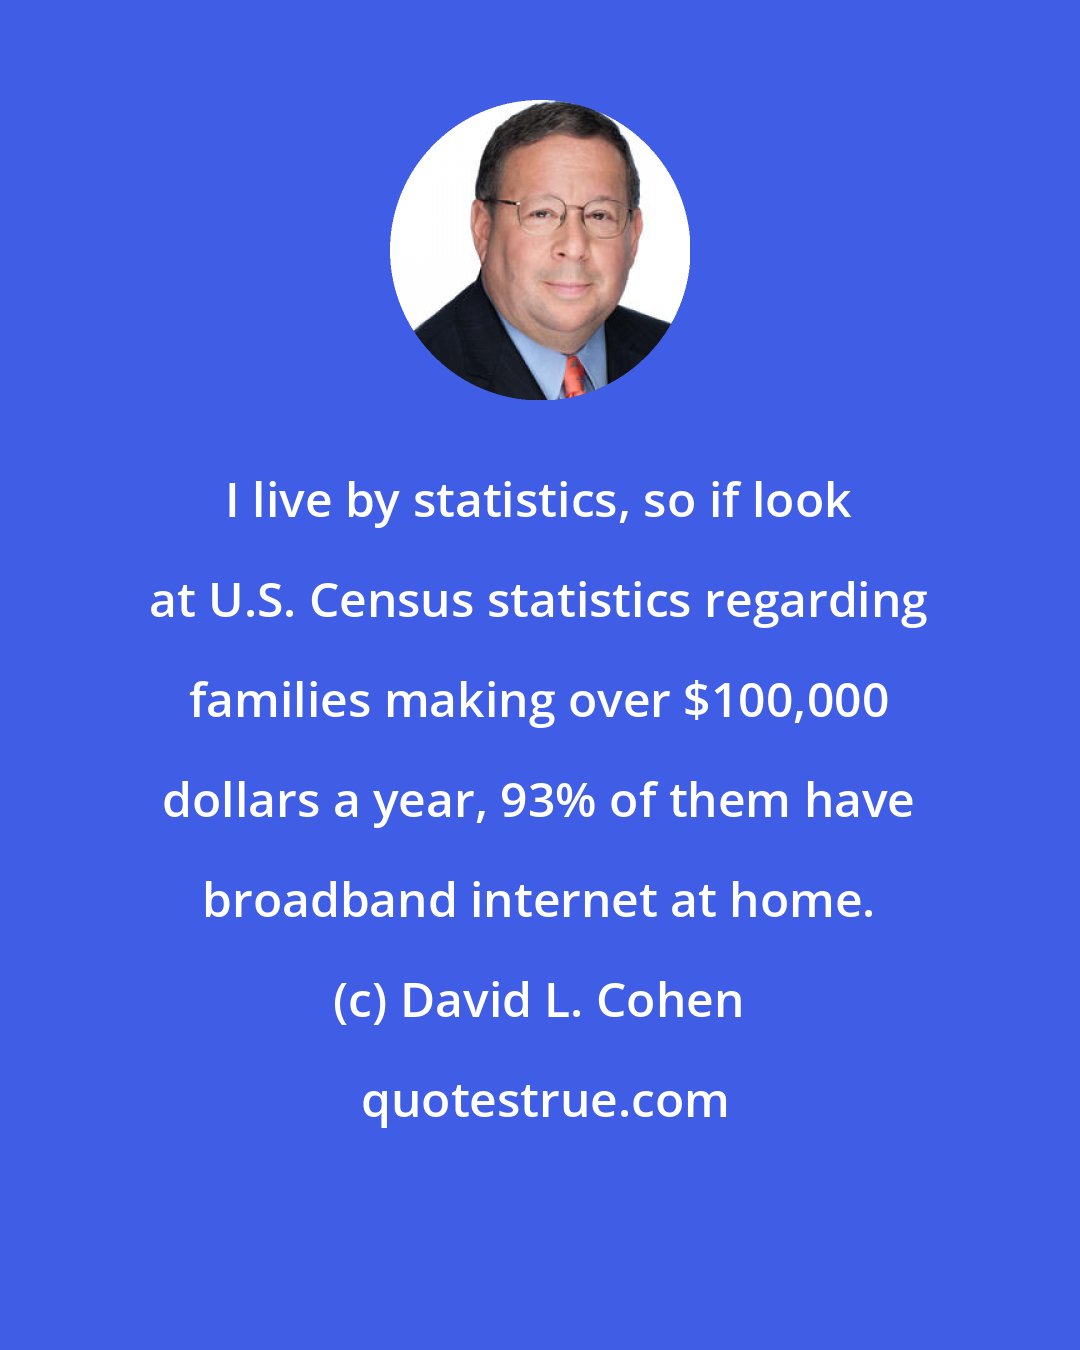 David L. Cohen: I live by statistics, so if look at U.S. Census statistics regarding families making over $100,000 dollars a year, 93% of them have broadband internet at home.